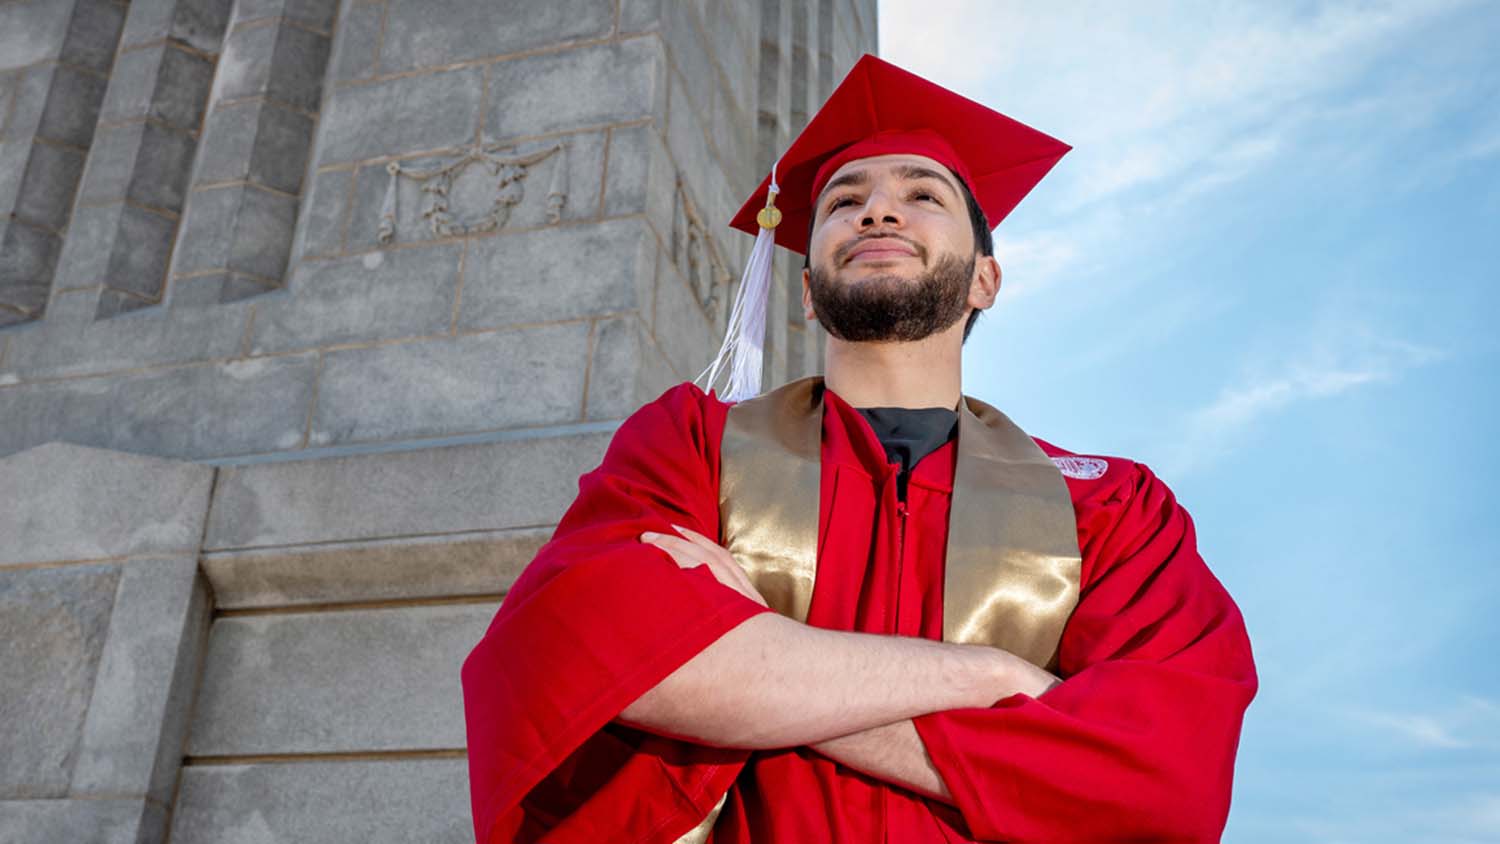 A brand-new NC State graduate stands with his arms crossed, donning his red cap and gown.